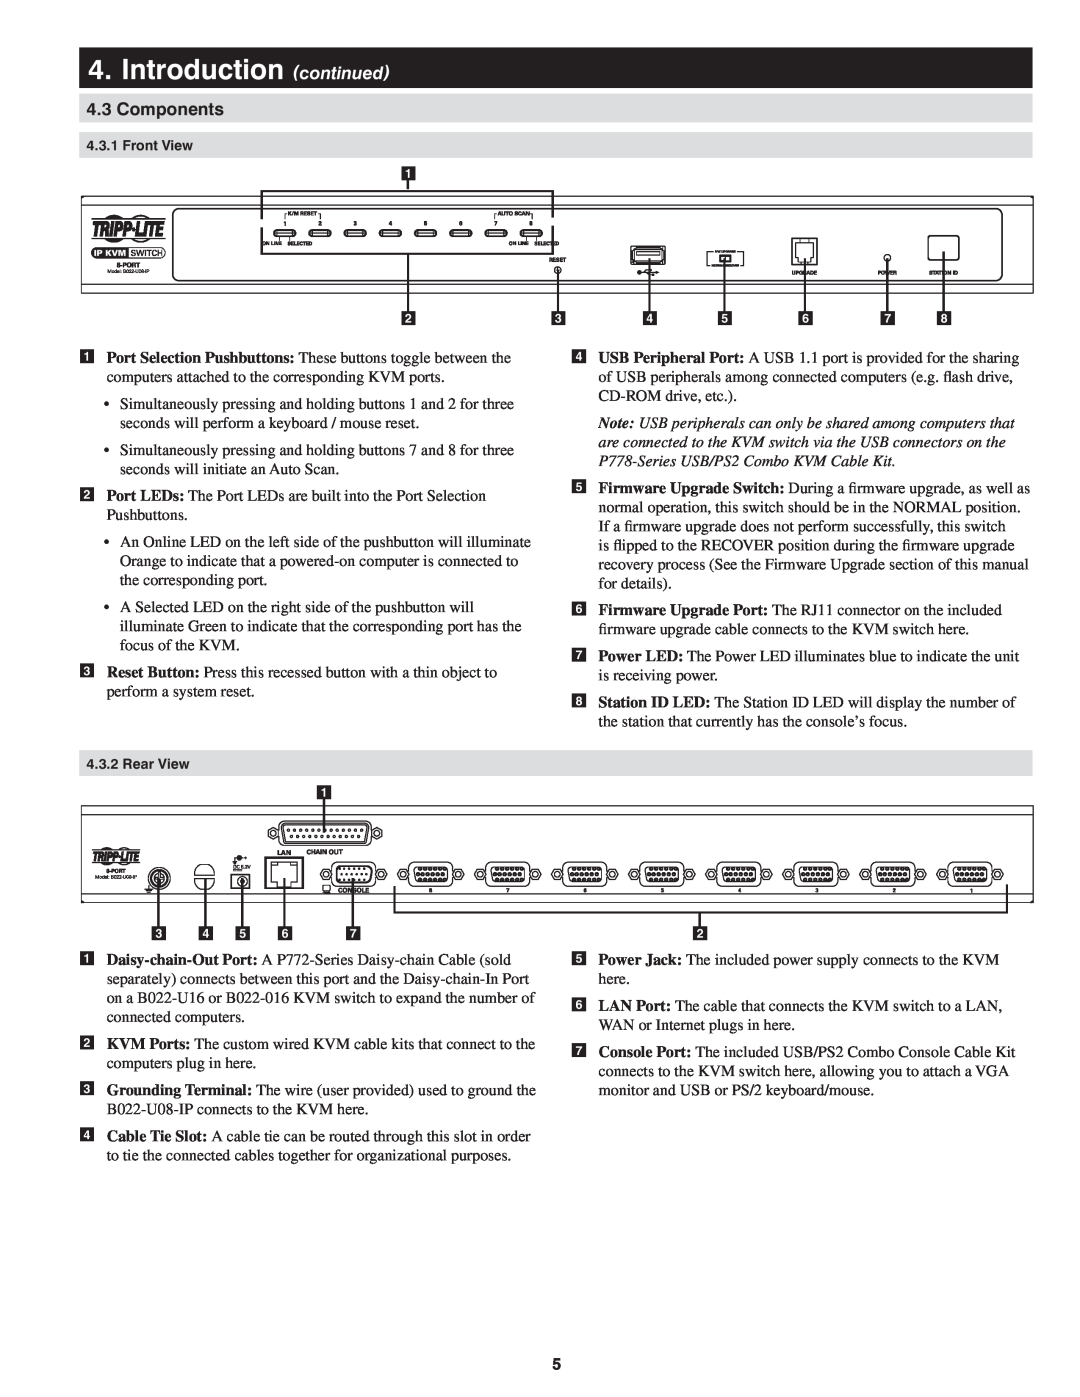 Tripp Lite B022-U08-IP owner manual Components, Introduction continued 